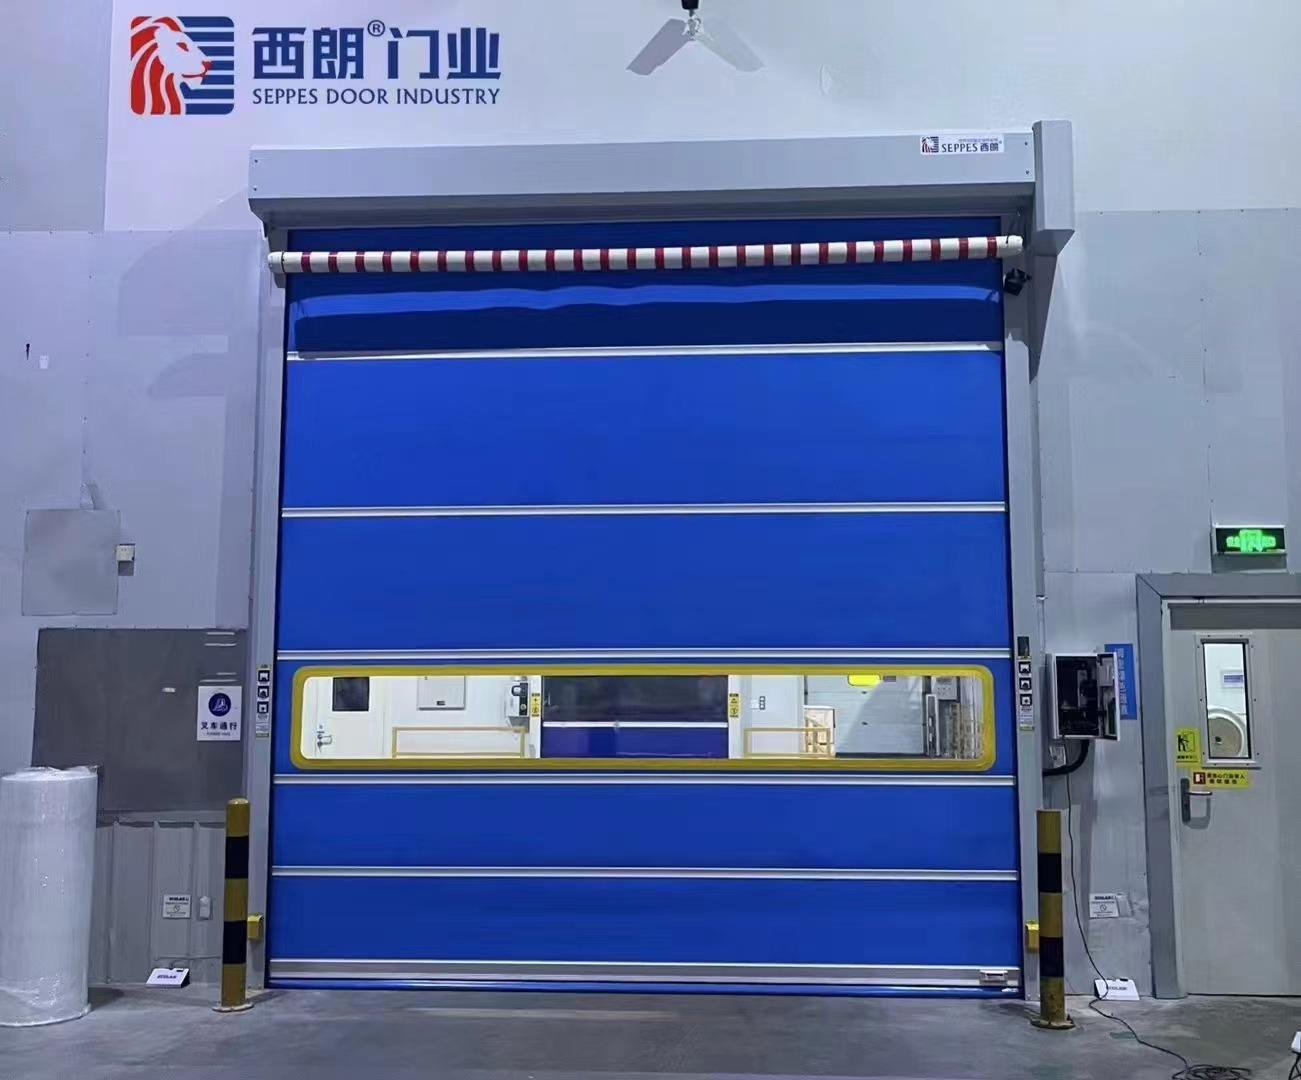 Why can the high speed door become a standard door for mold workshops